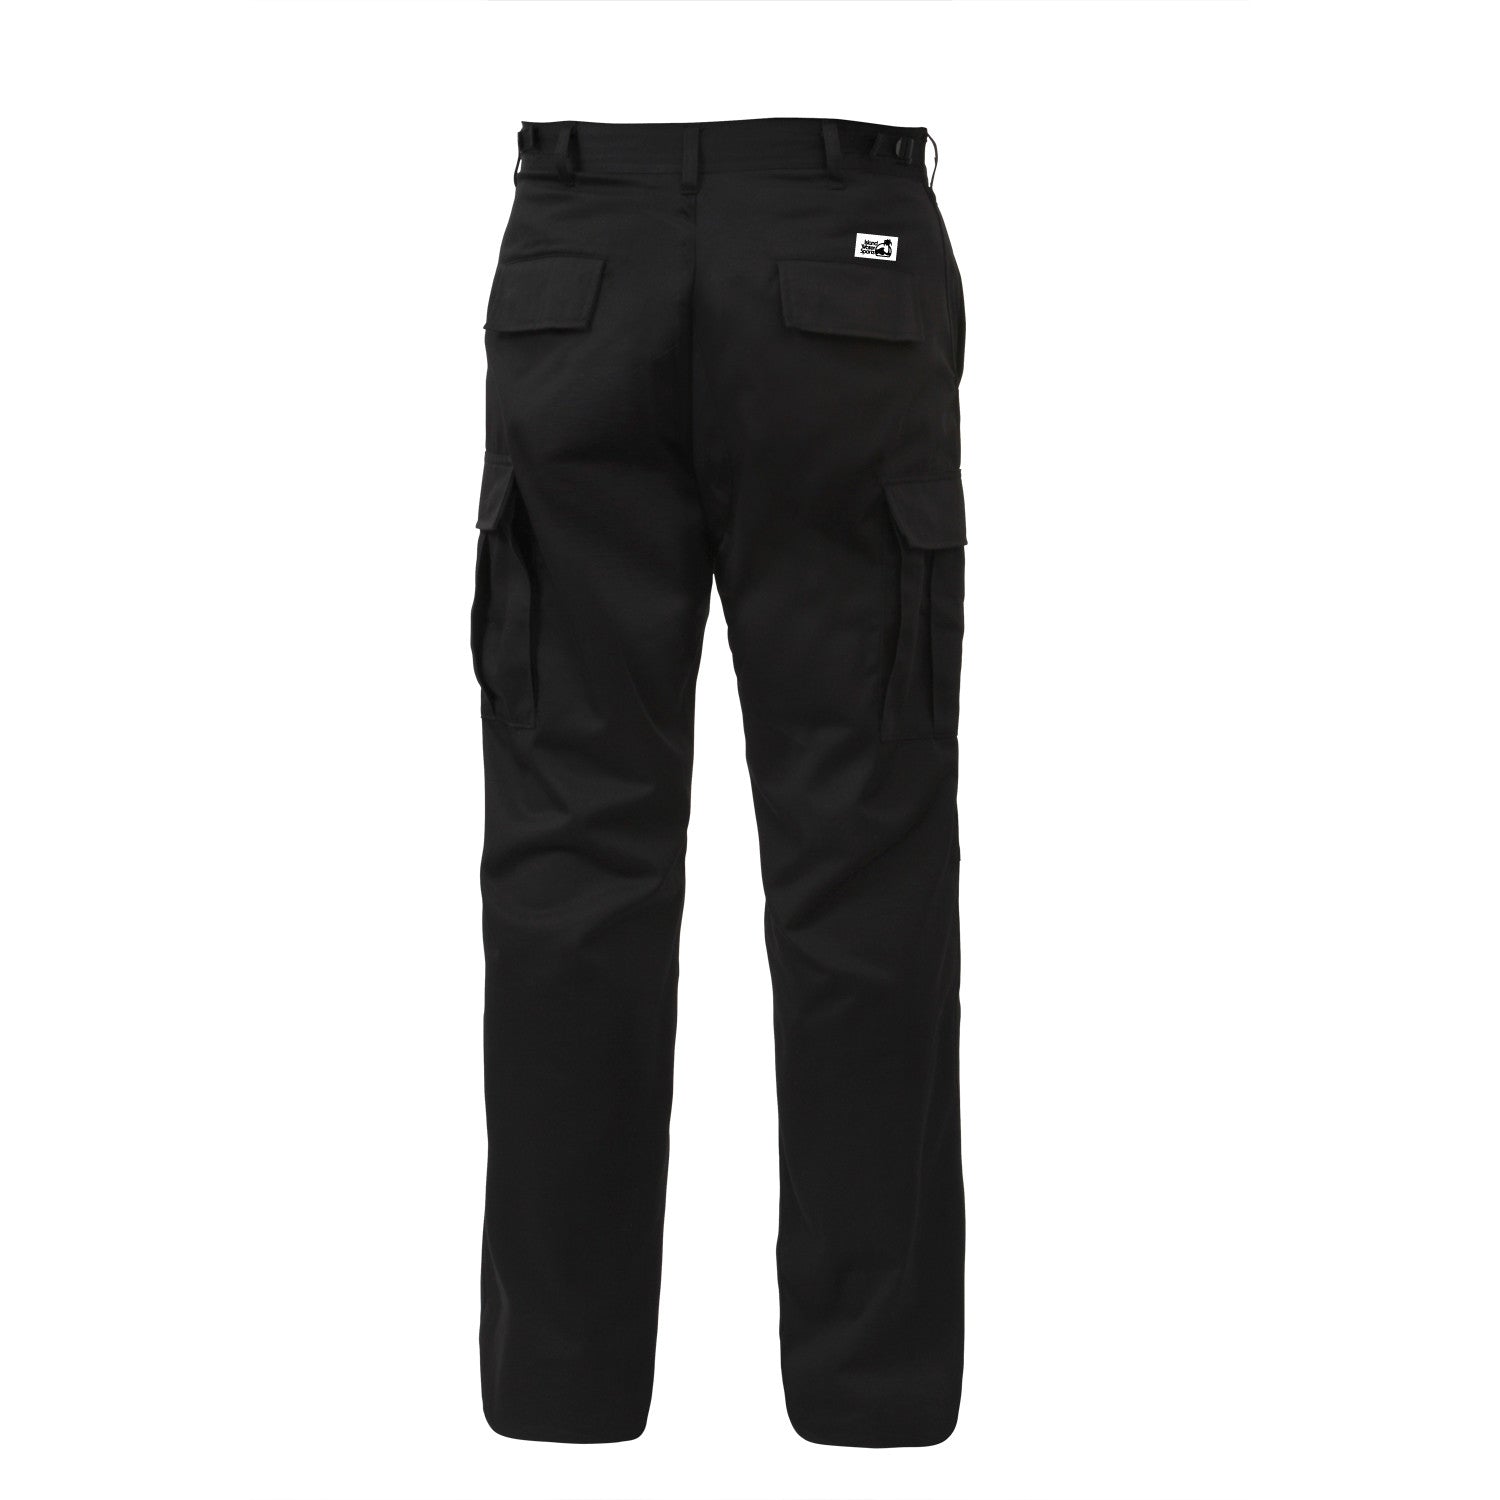 Rothco Relaxed Fit Zipper Fly BDU Pants Black S